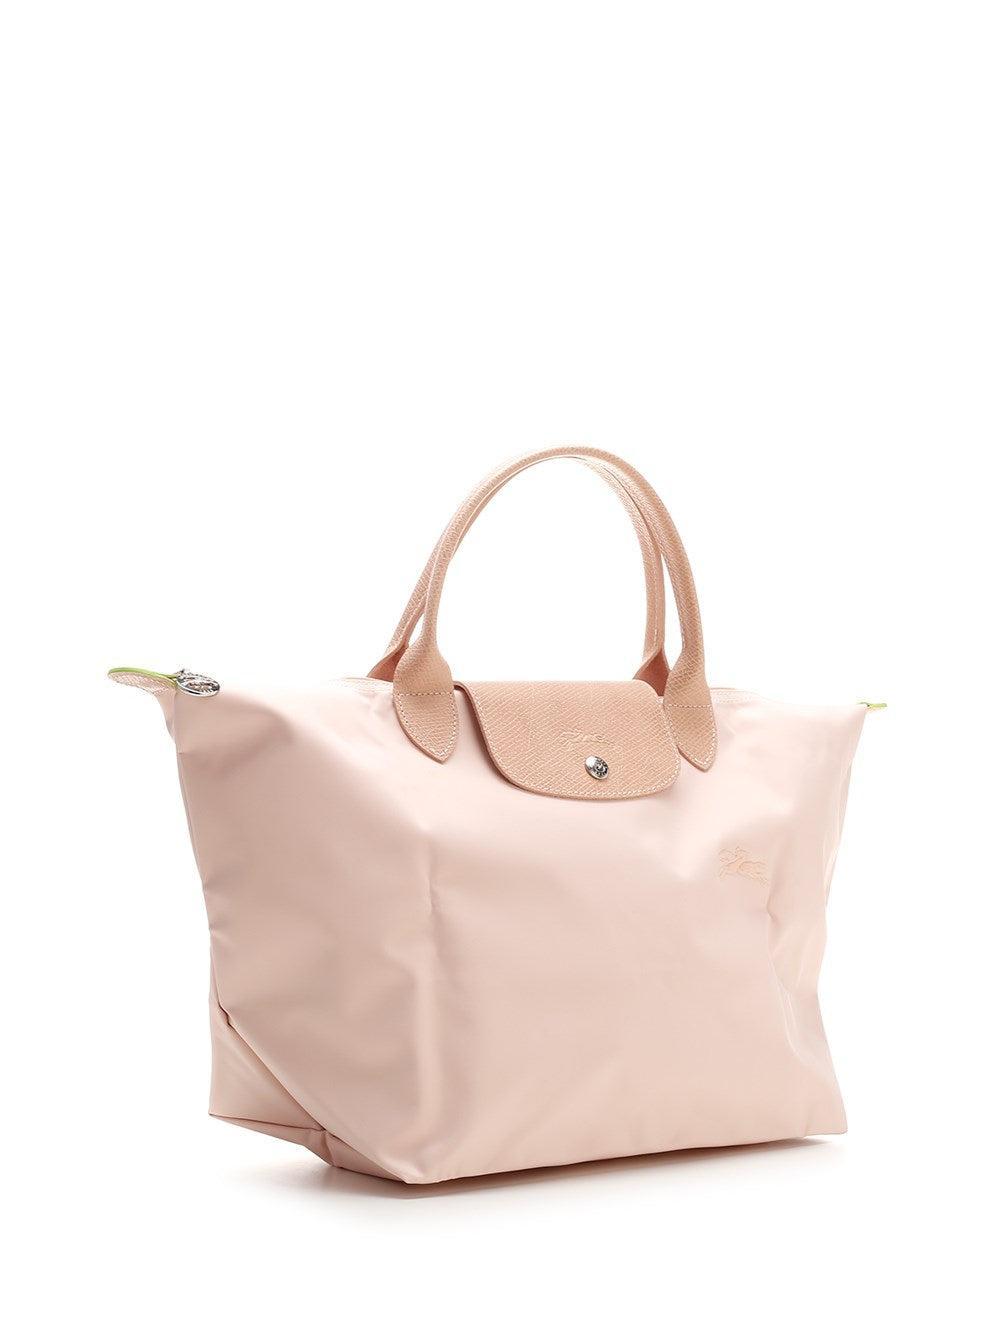 Longchamp Le Pliage Logo Embroidered Tote Bag in Pink | Lyst